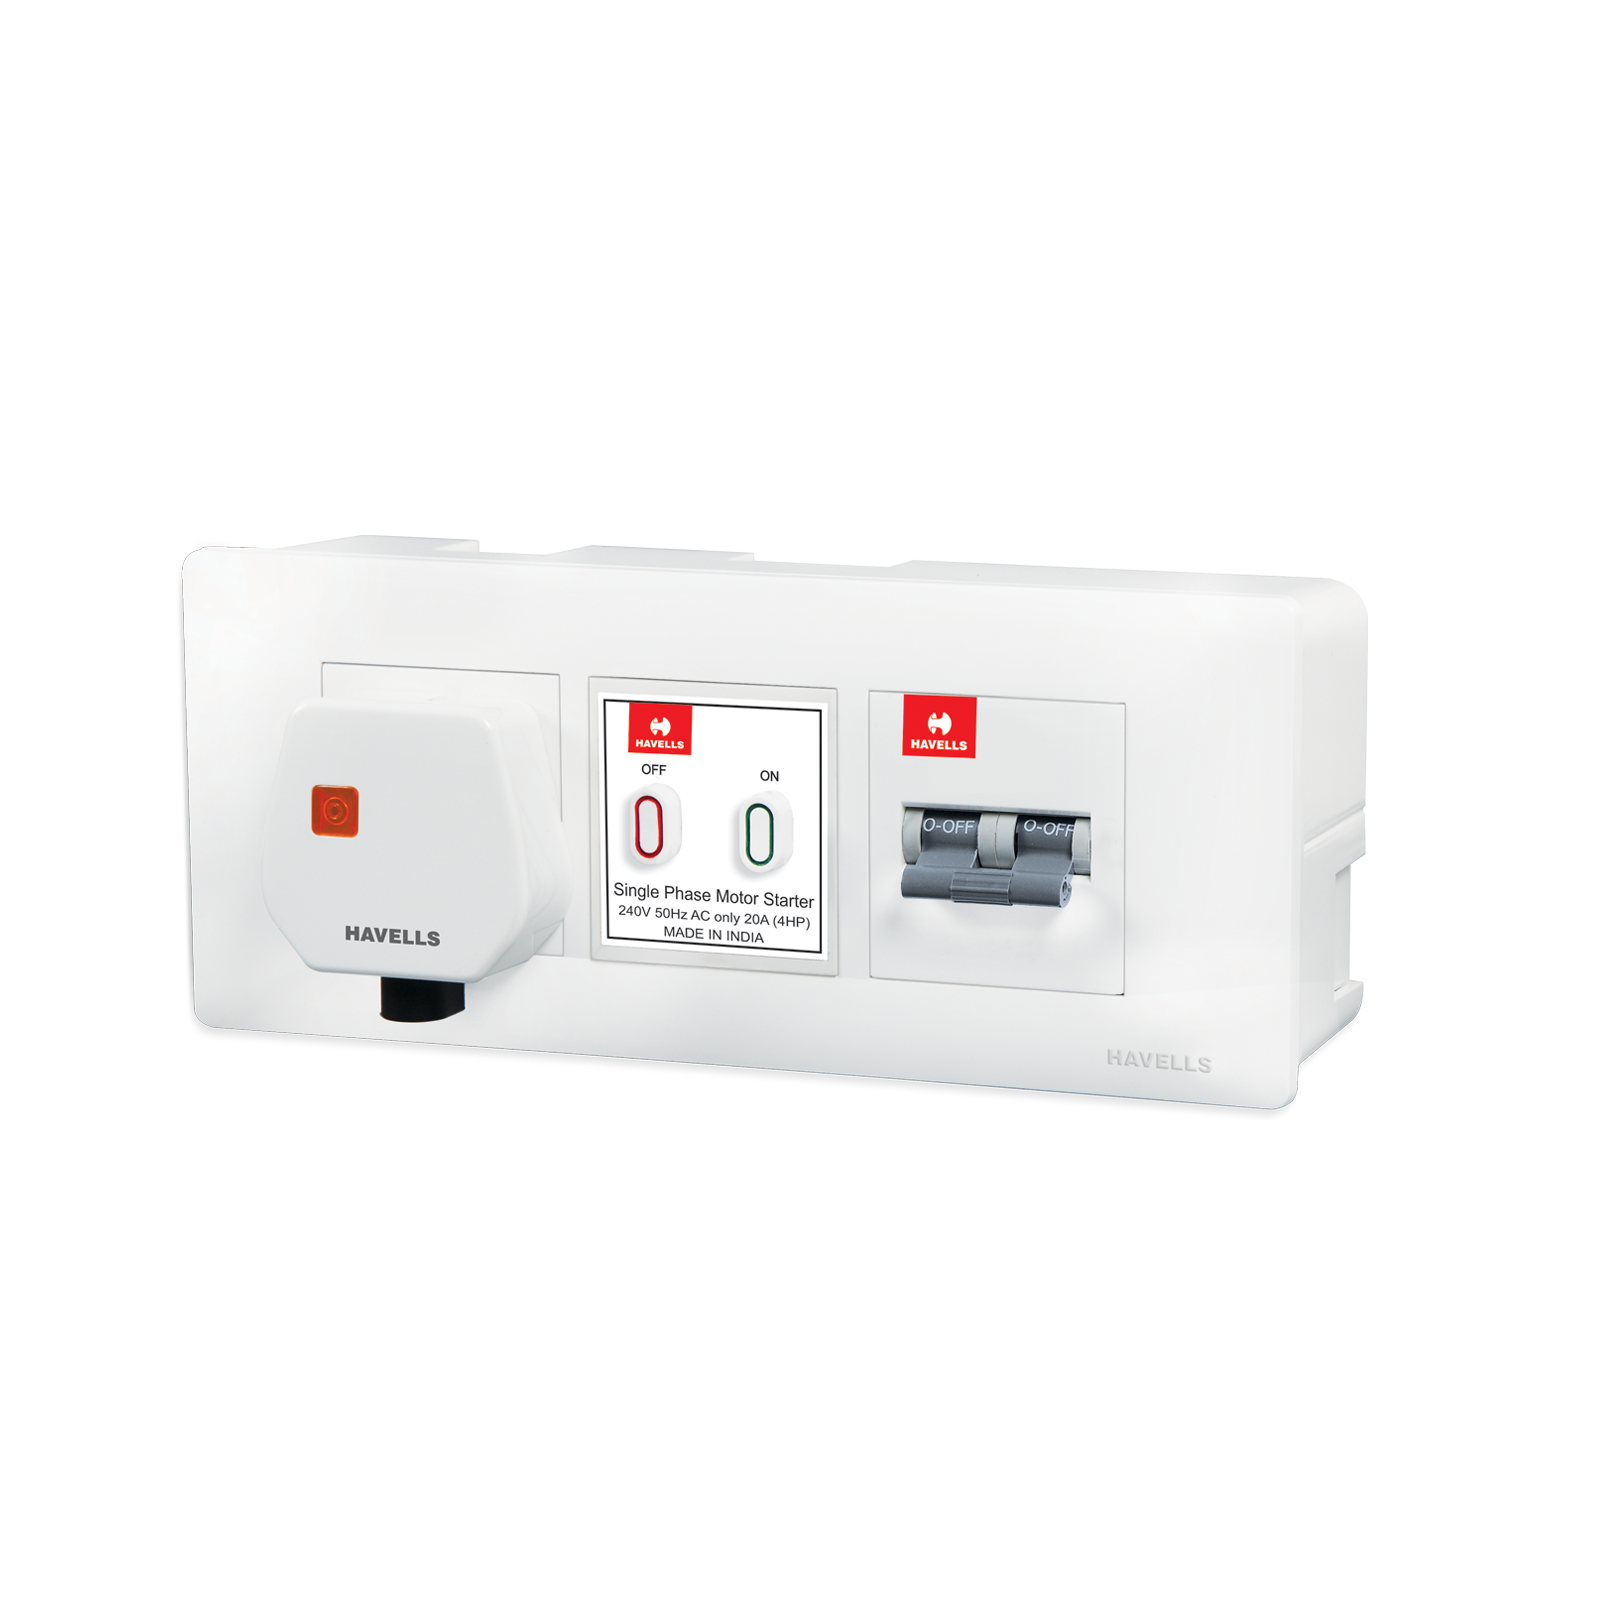 Havells MCB DBOXX Protected Power Unit (Pack of 2)